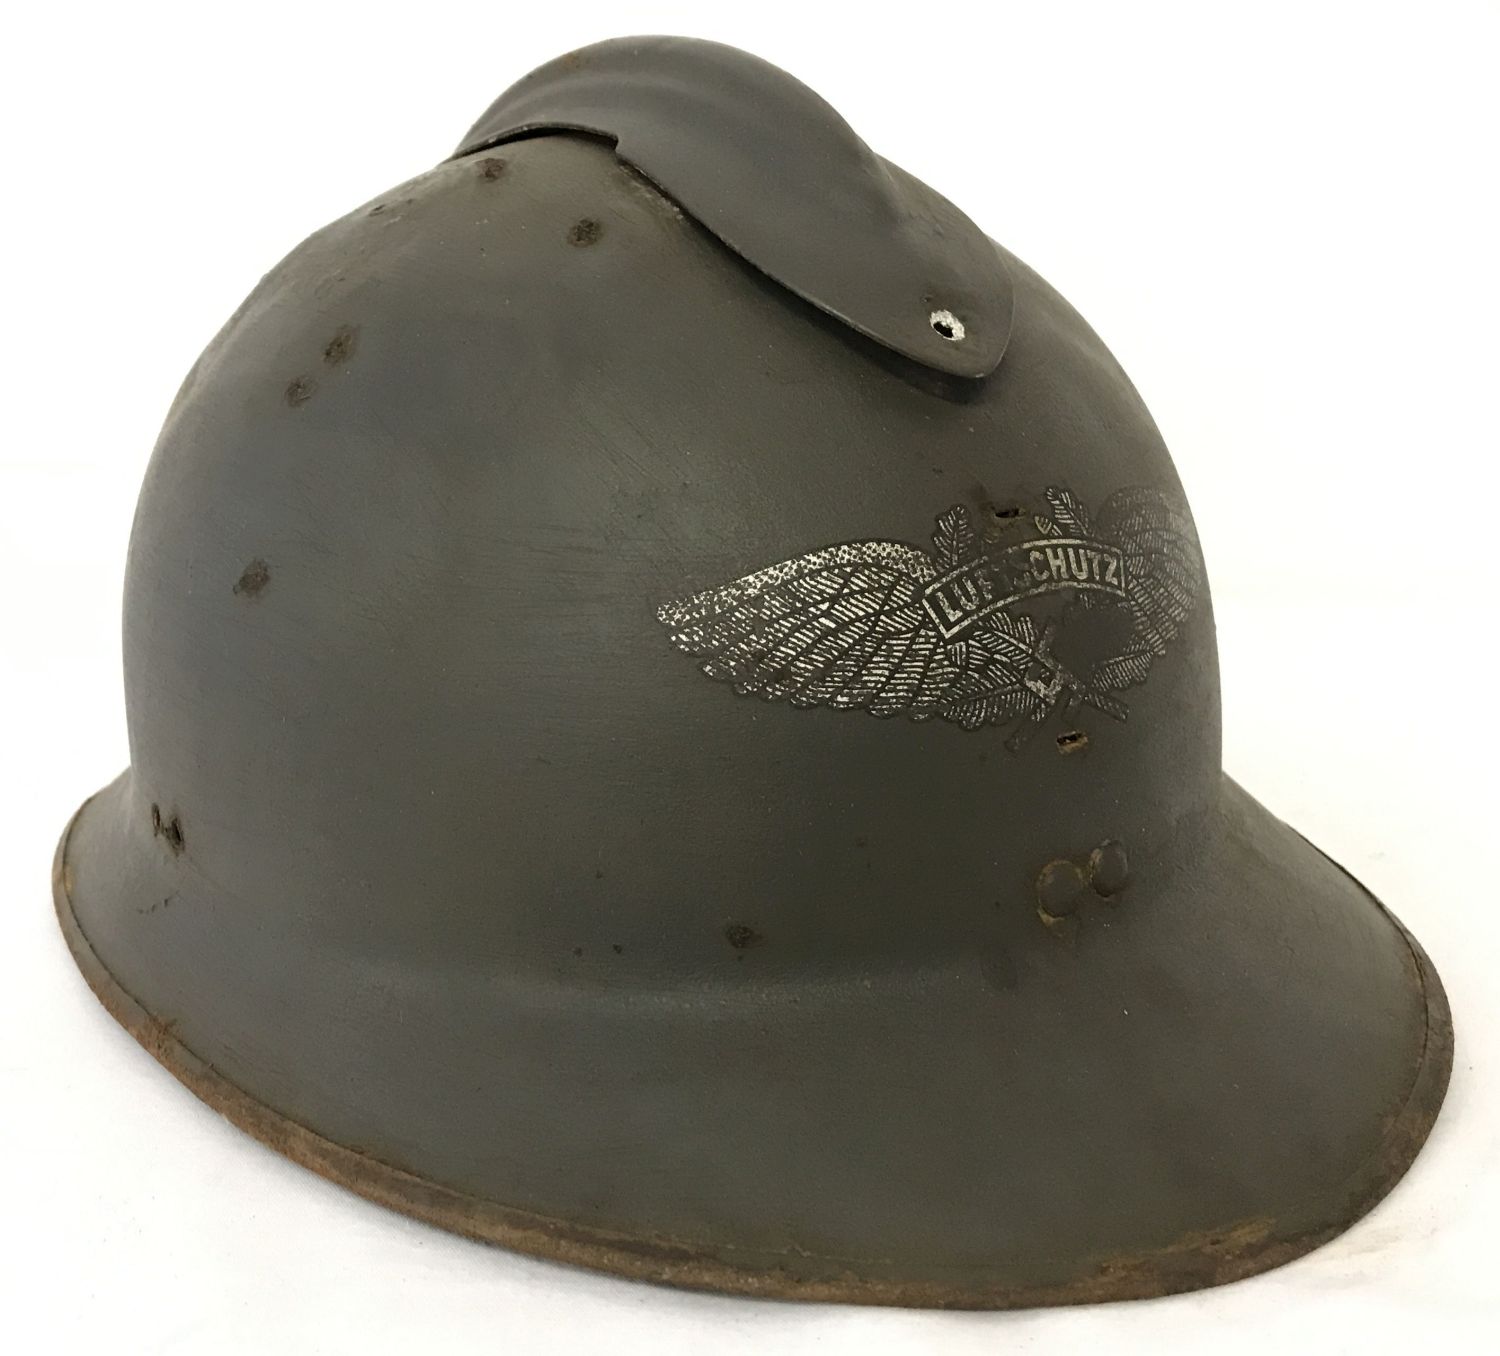 A WWII style captured French M23 Casque helmet used by the German Luftshutz (Air Raid Police).